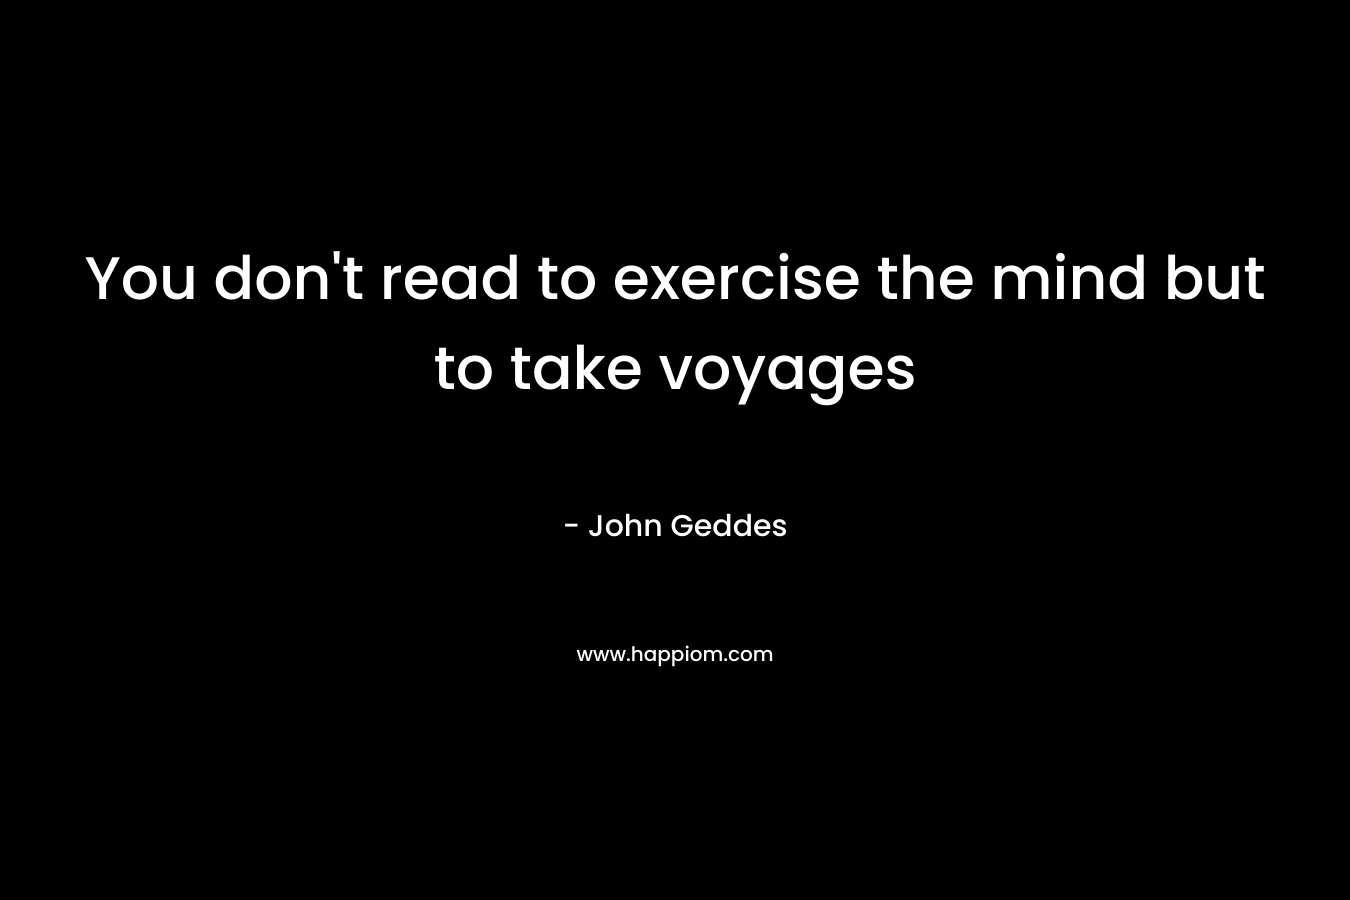 You don't read to exercise the mind but to take voyages